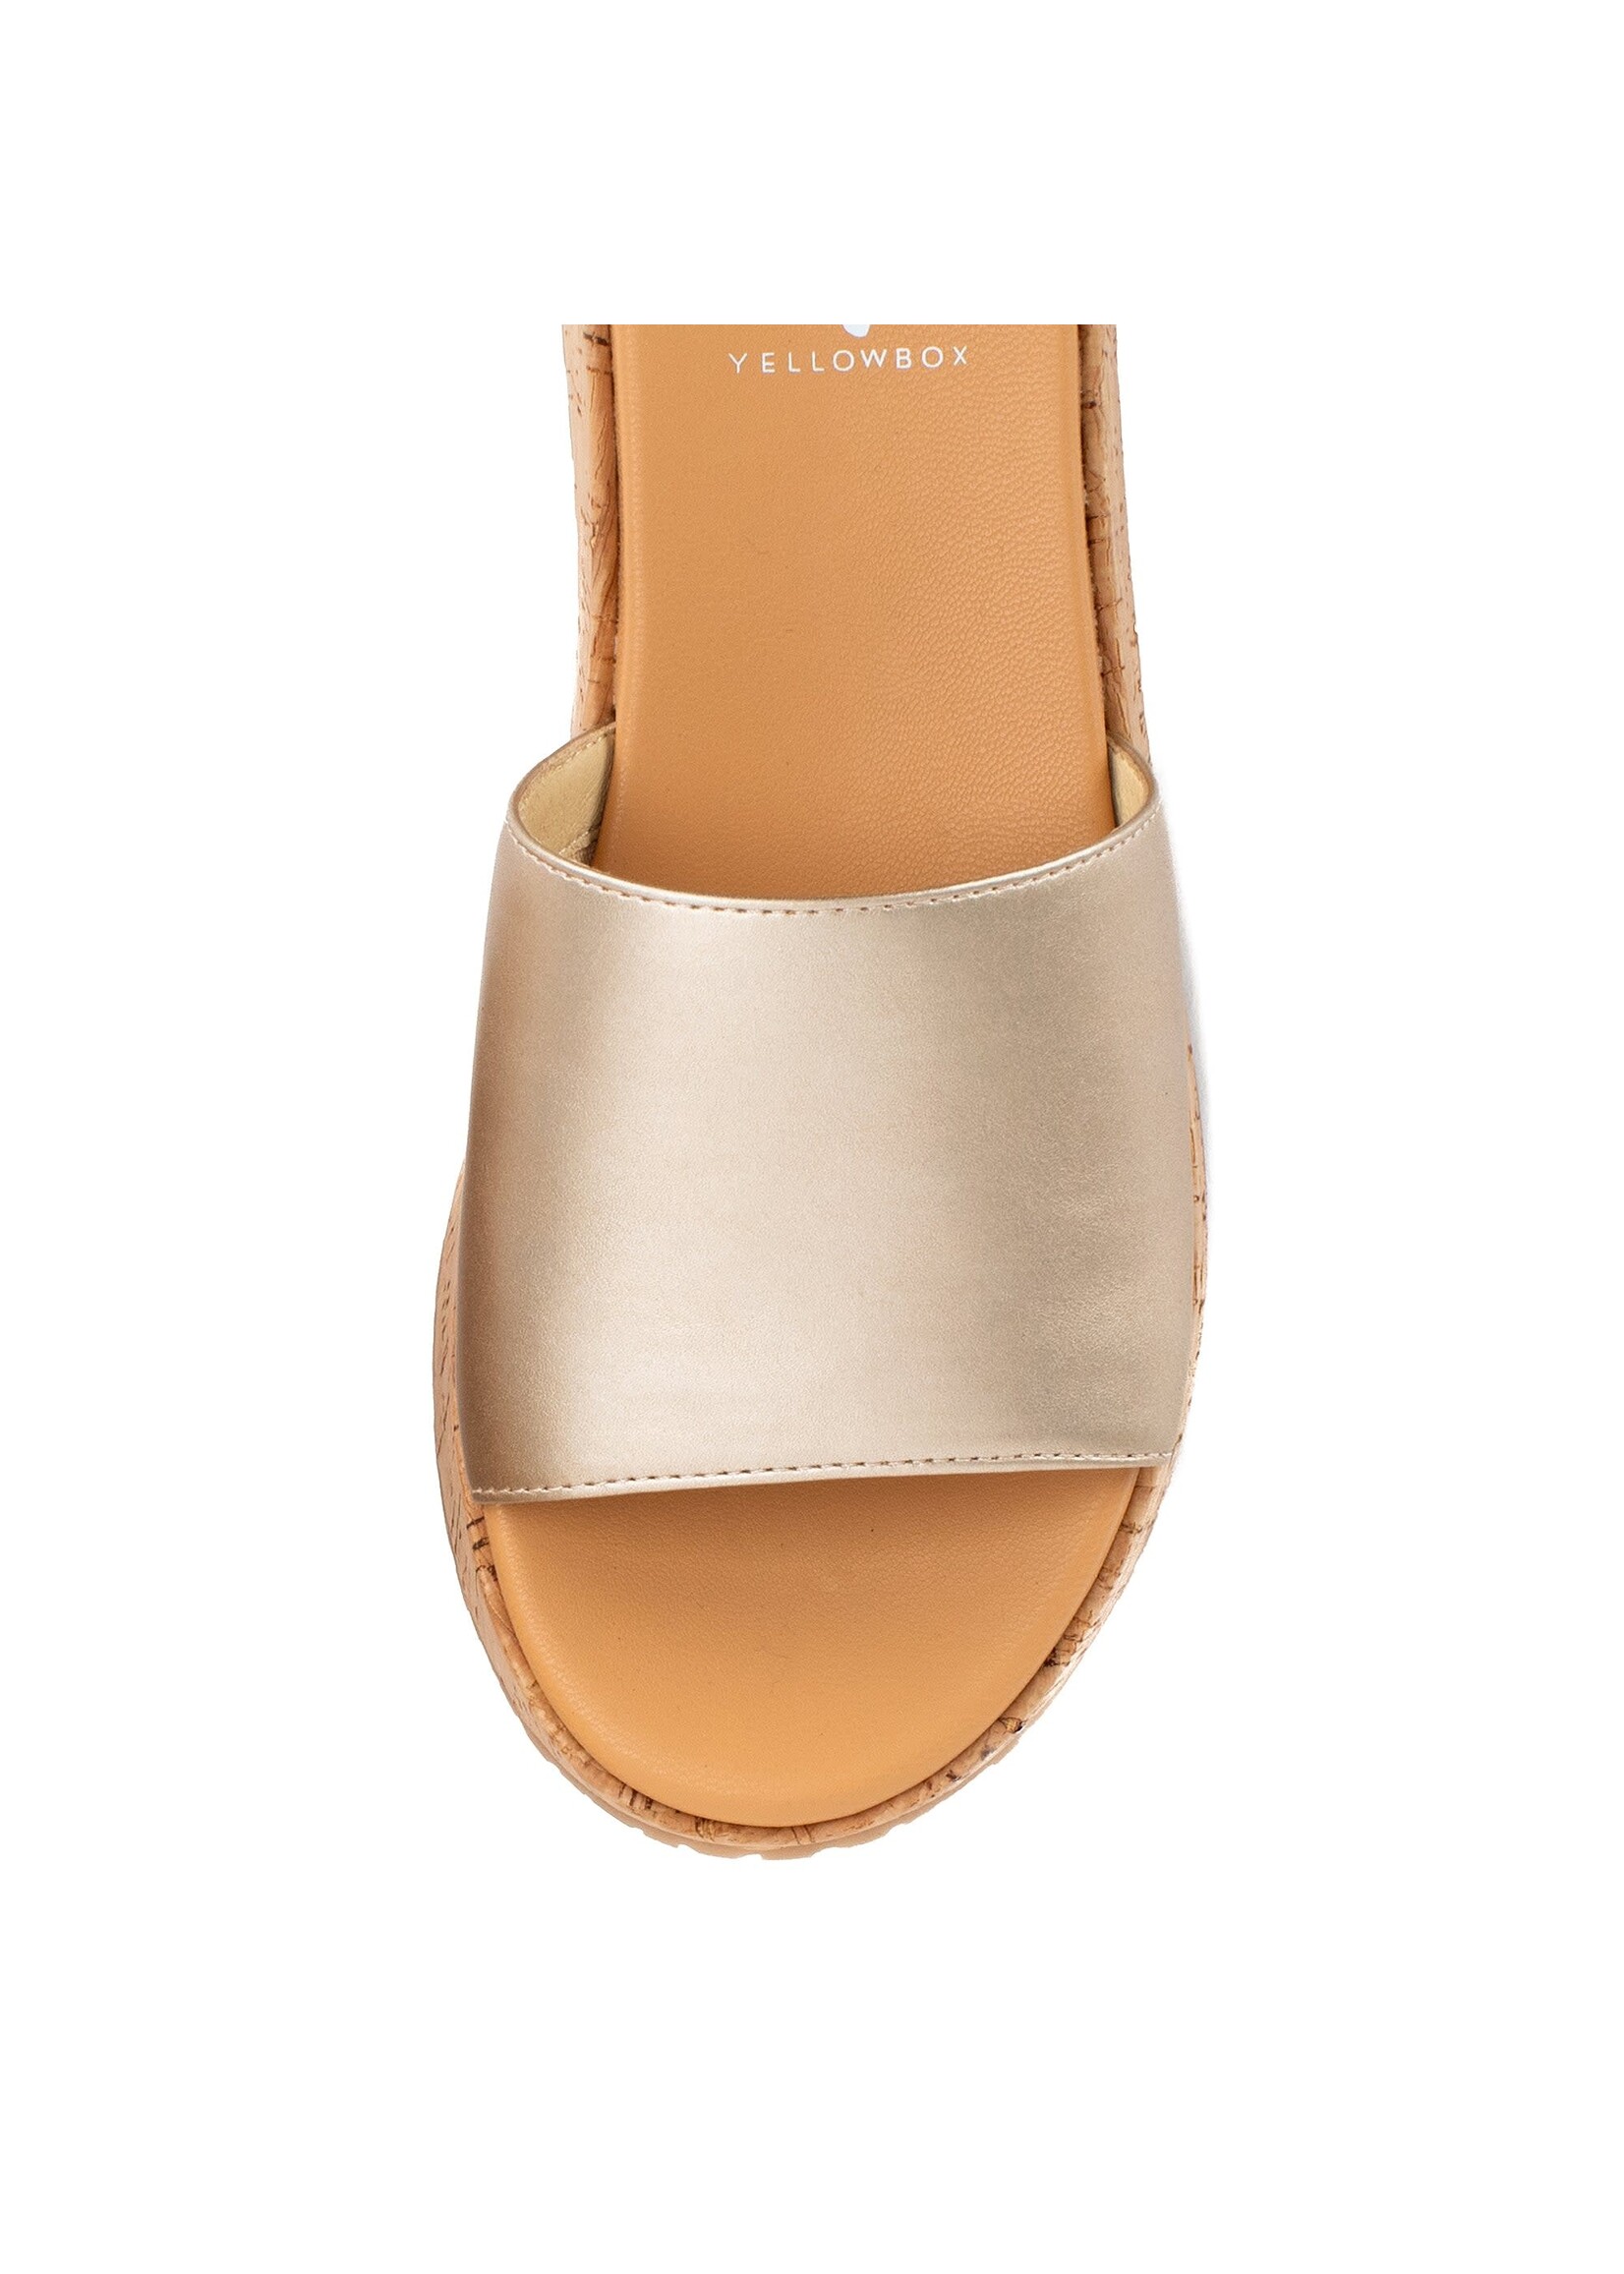 Yellow Box Shoes Anatto Flatform Slide in Gold by Yellow Box